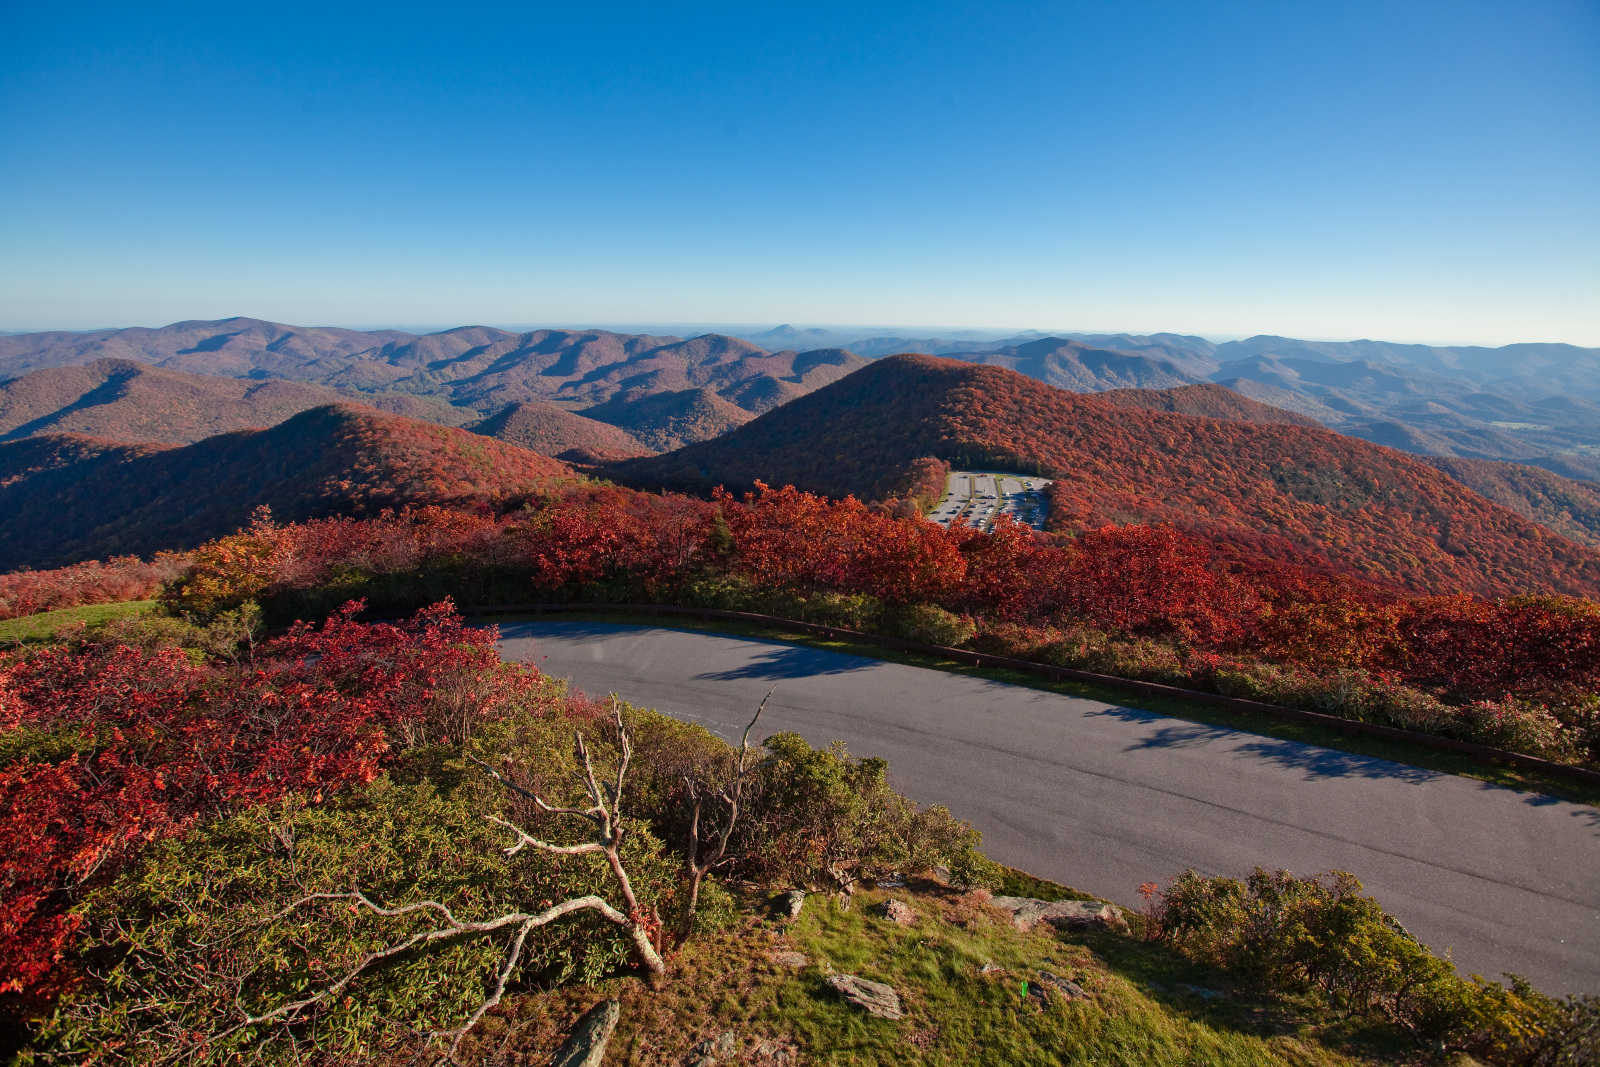 At 4,784 feet above sea level, Brasstown Bald is the highest natural point in Georgia. Hikers can choose from a variety of trails to suit their experience level.